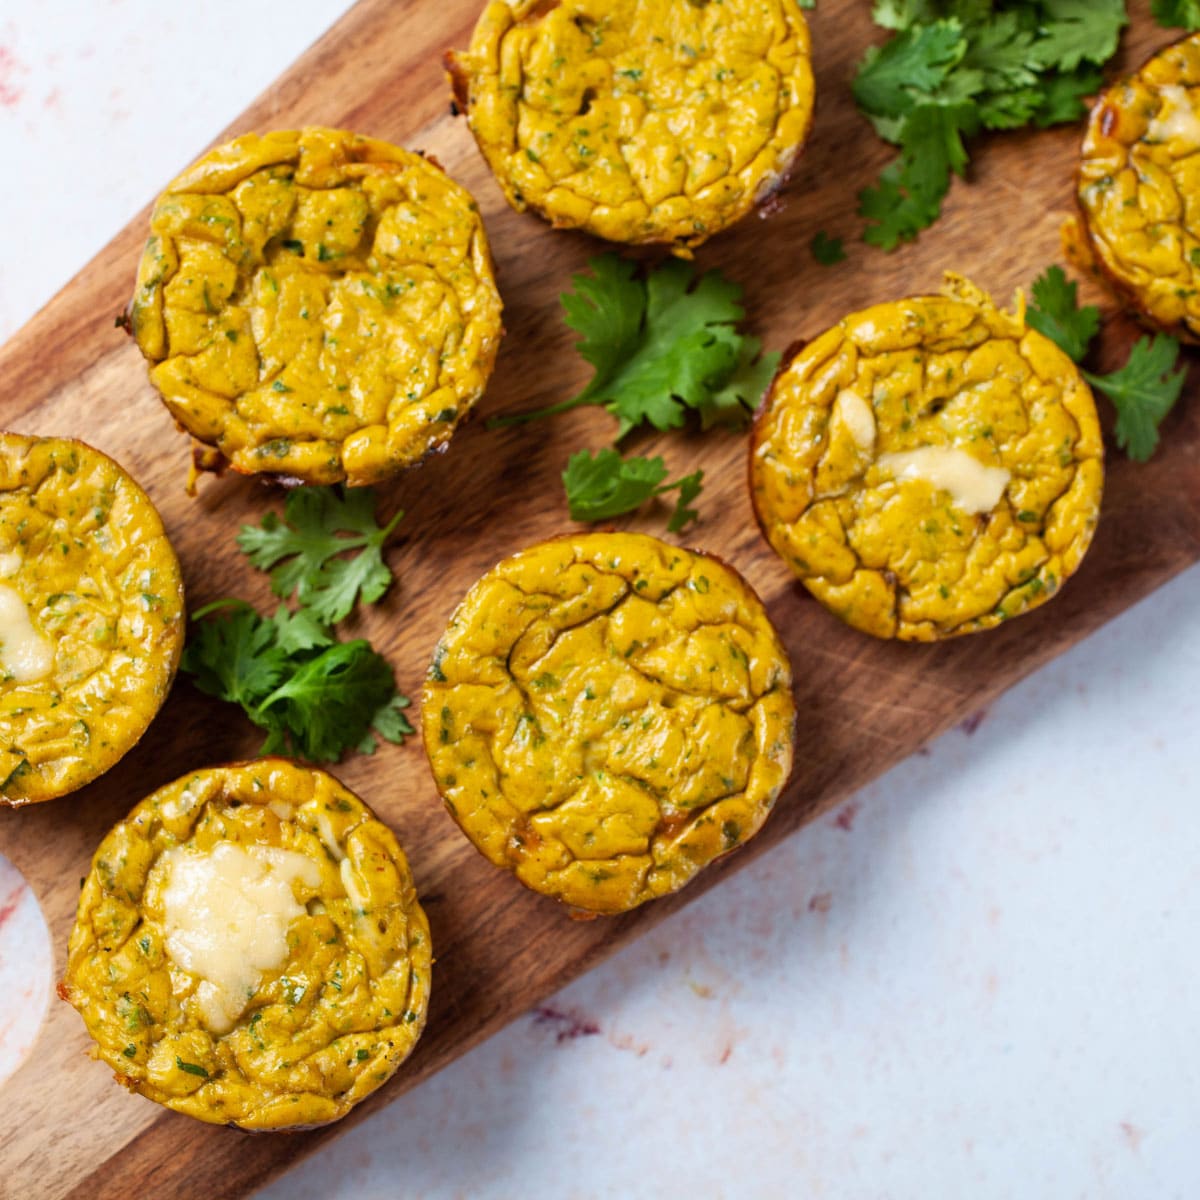 Cheesy egg muffins assorted on a wooden board with fresh parsley leaves.